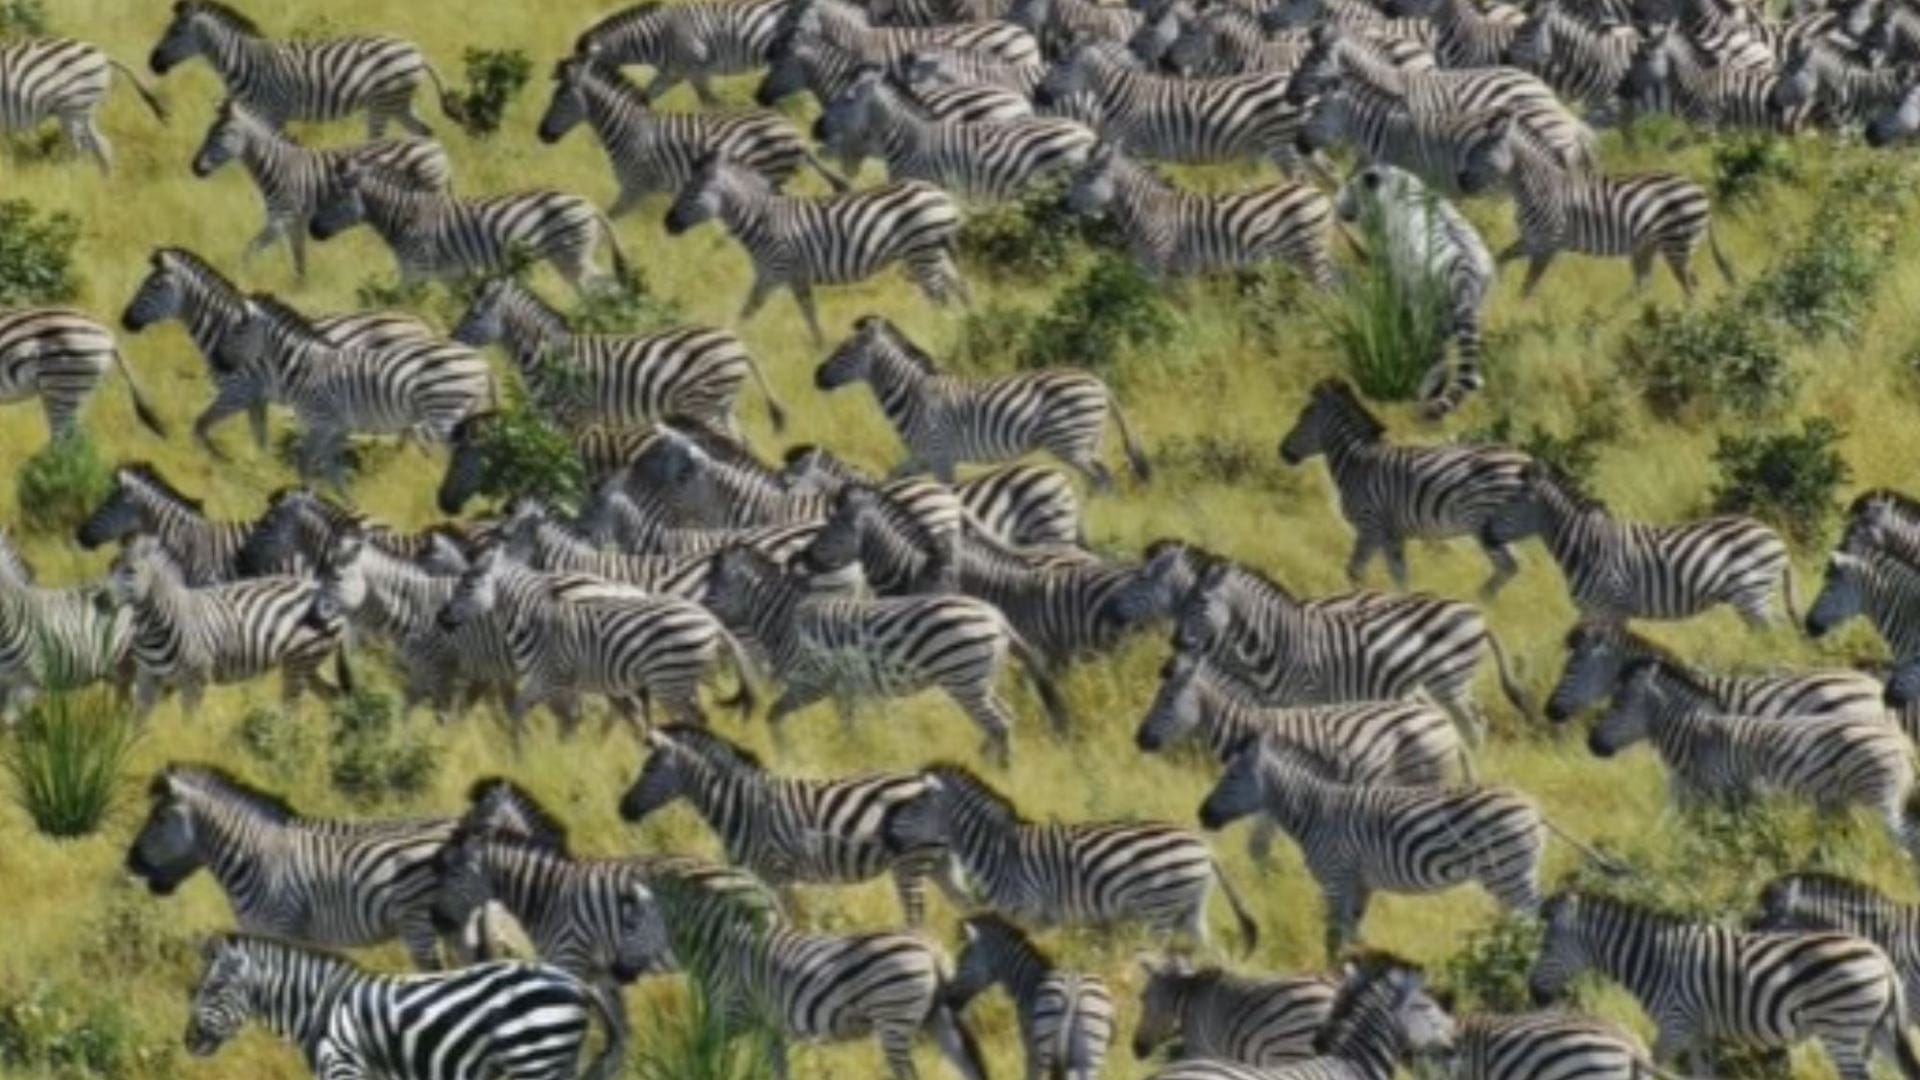 You could have the eyes of an archer if you could see a tiger lurking among this herd of zebras in ten seconds.